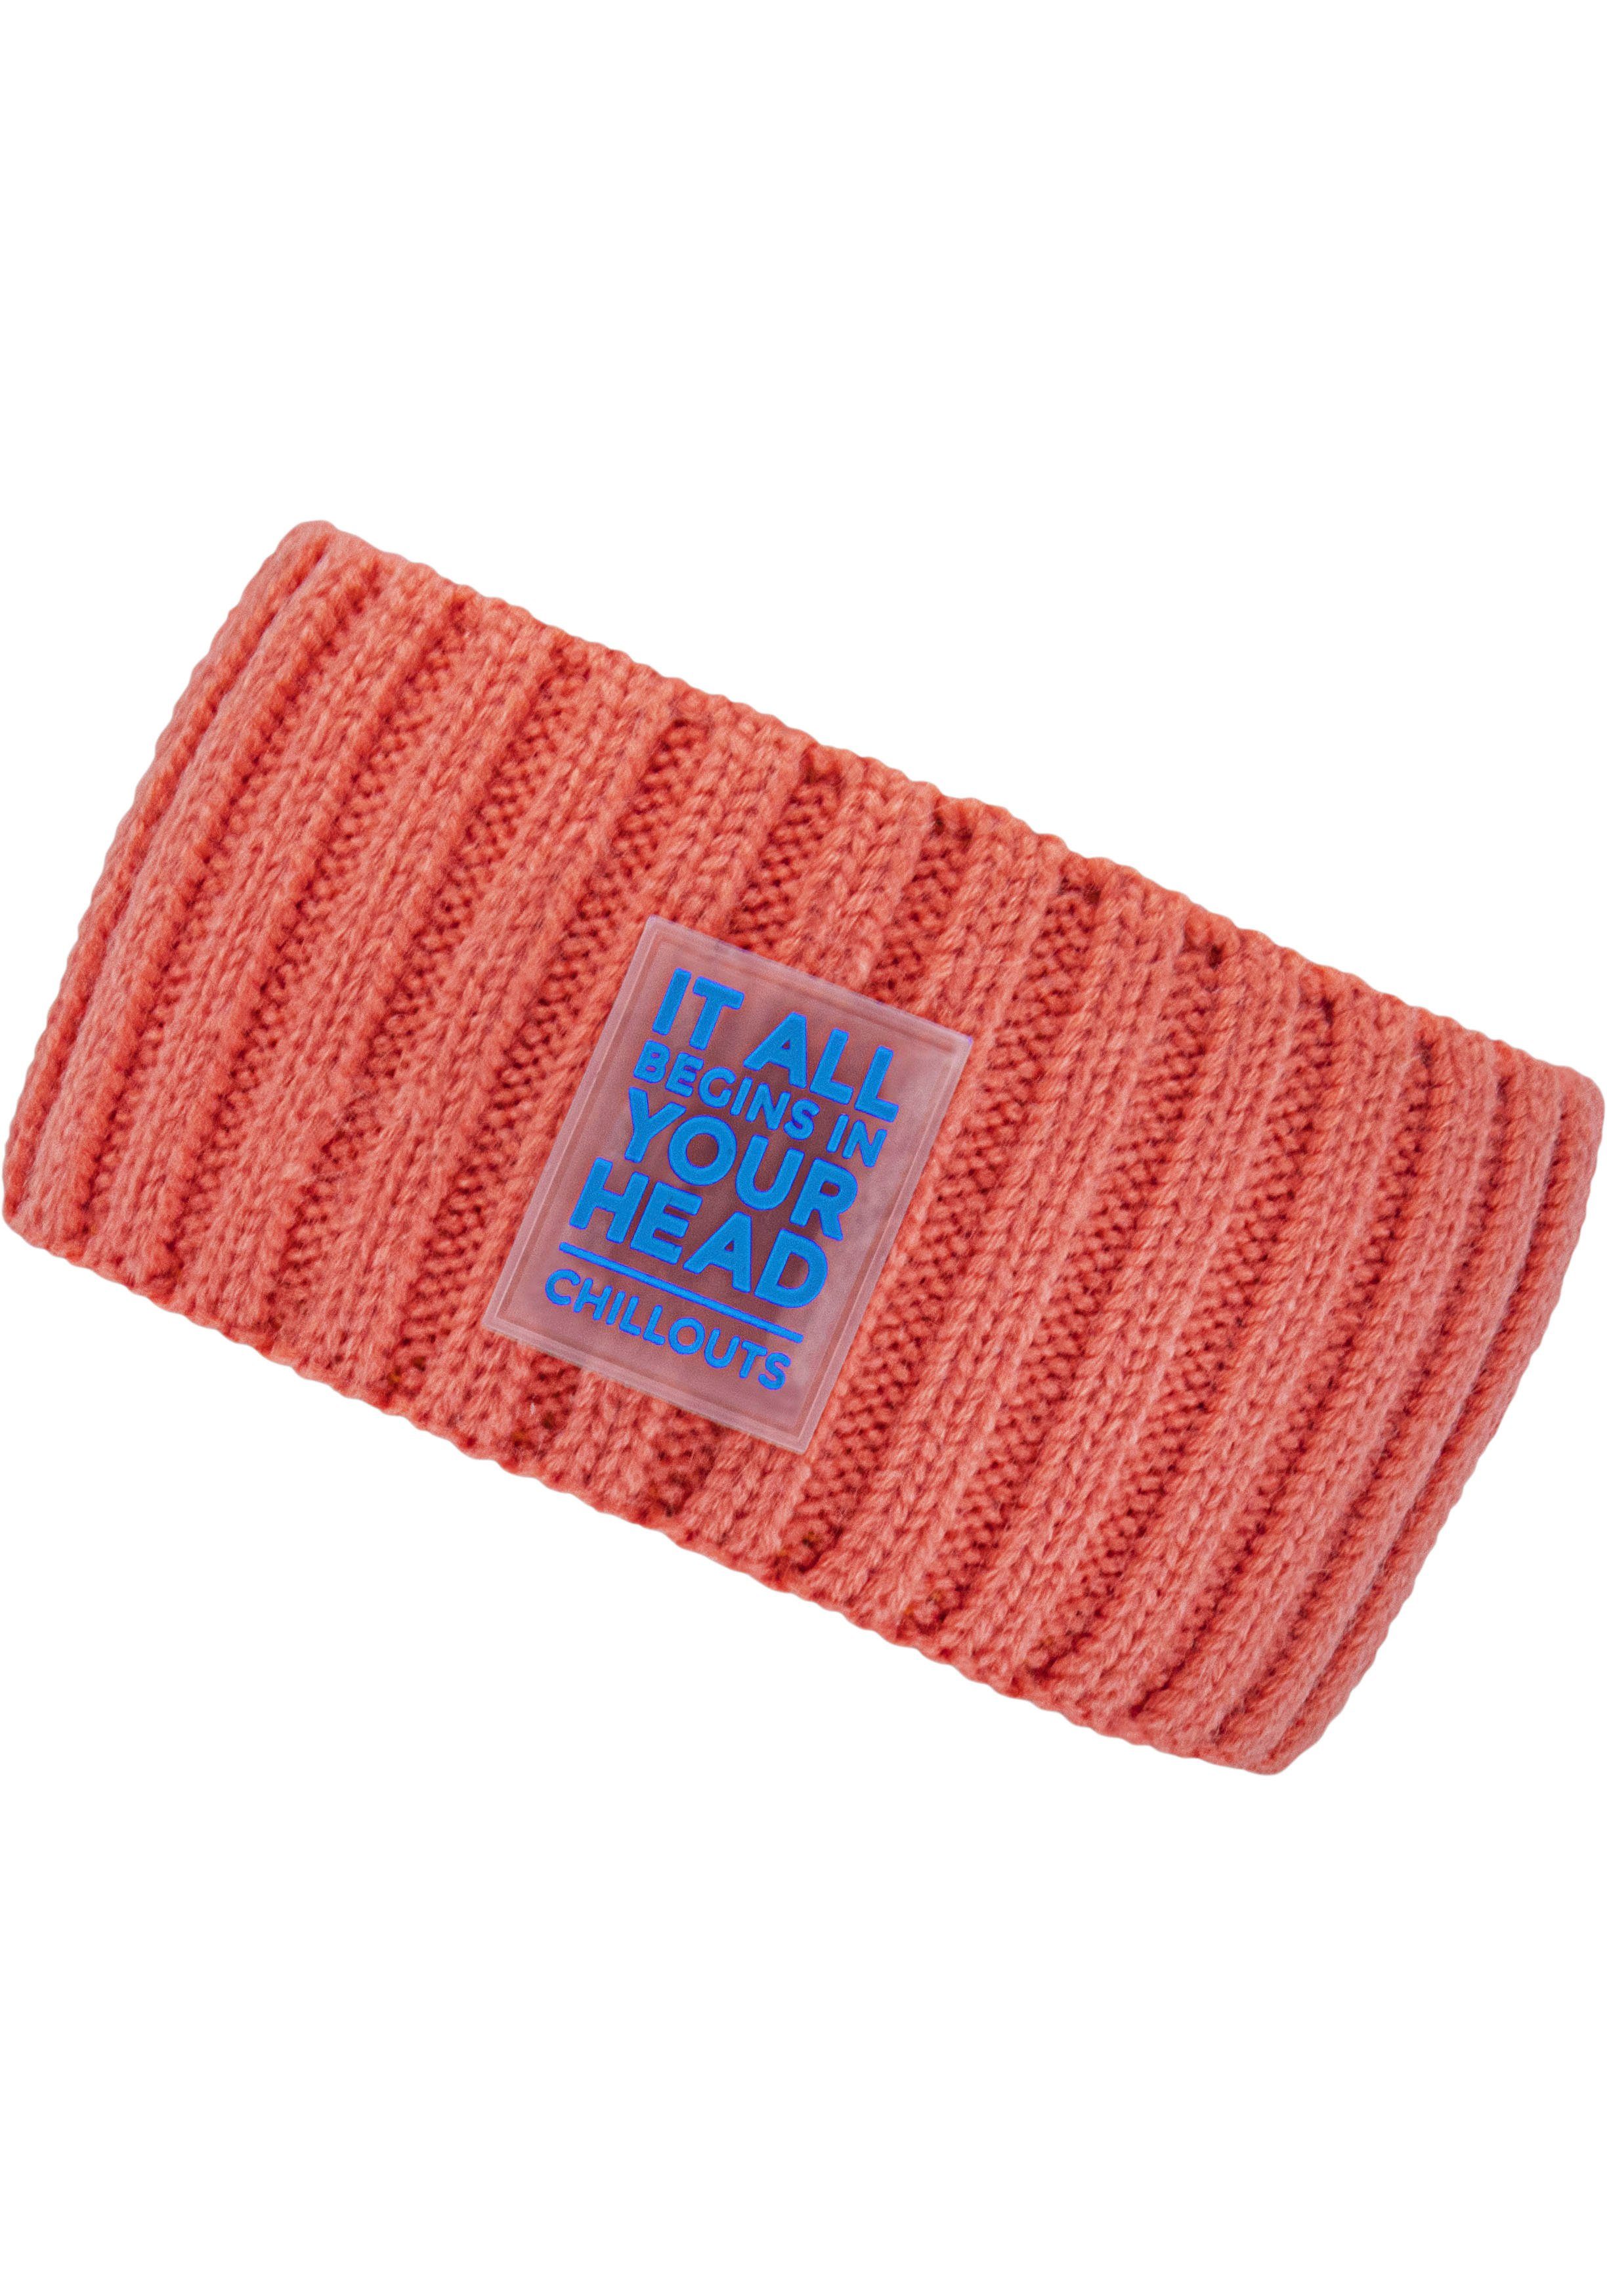 chillouts Trendiges Zoe Design Stirnband Headband coral